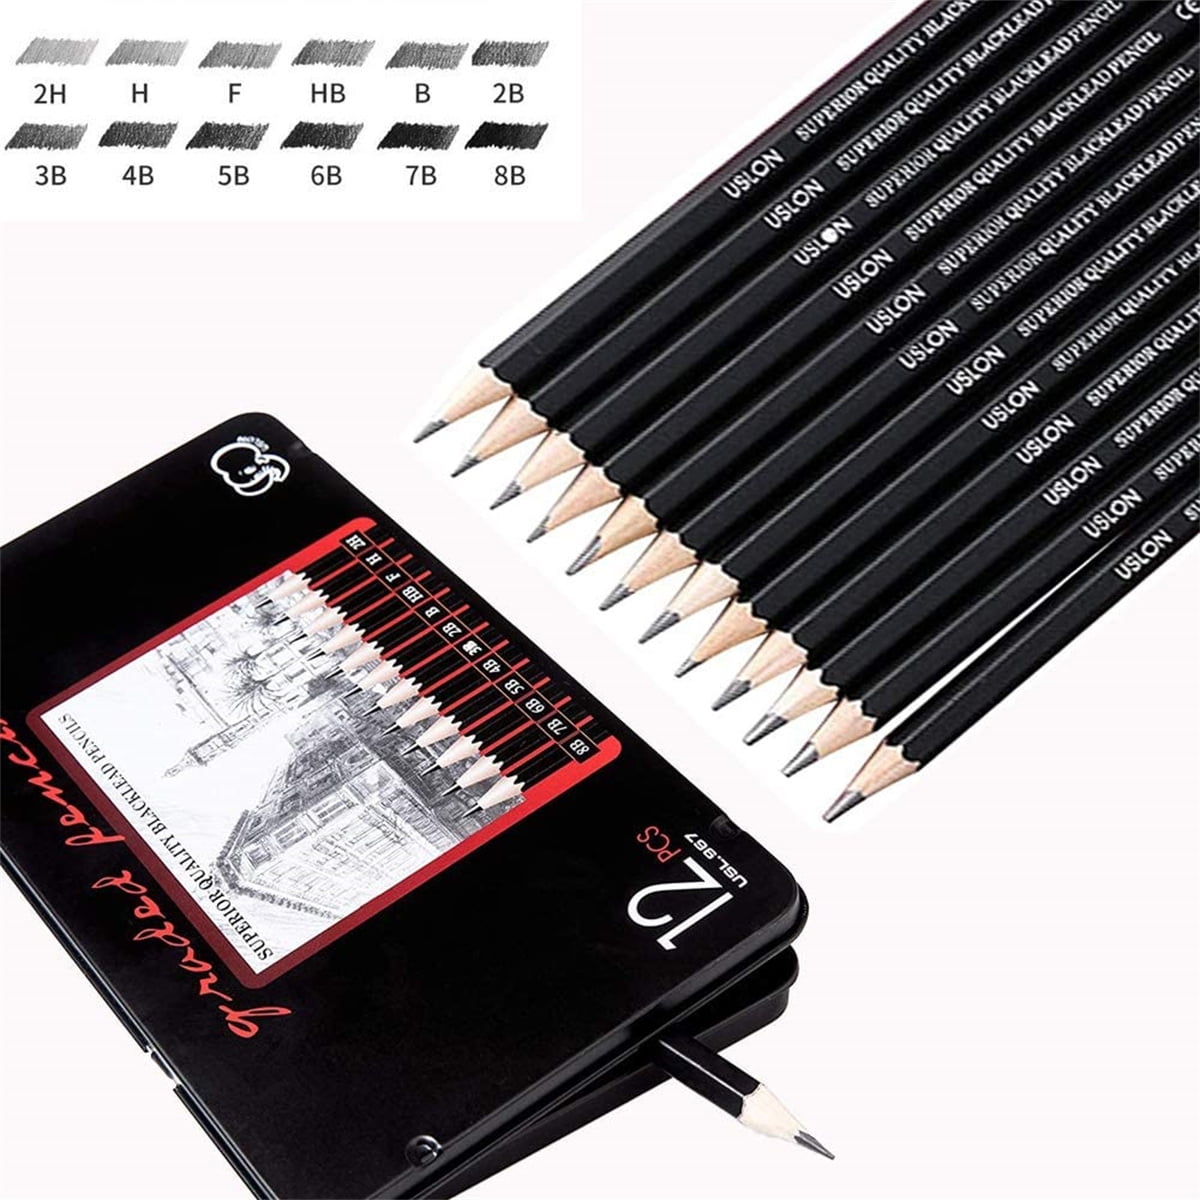 Professional Drawing Sketching Pencil Set 12Pcs Graphite Pencils for  Beginners Beginners Pro Artists Graphite Pencils Durable Not easy to break  Easy to erase Sketch pencil 2B 